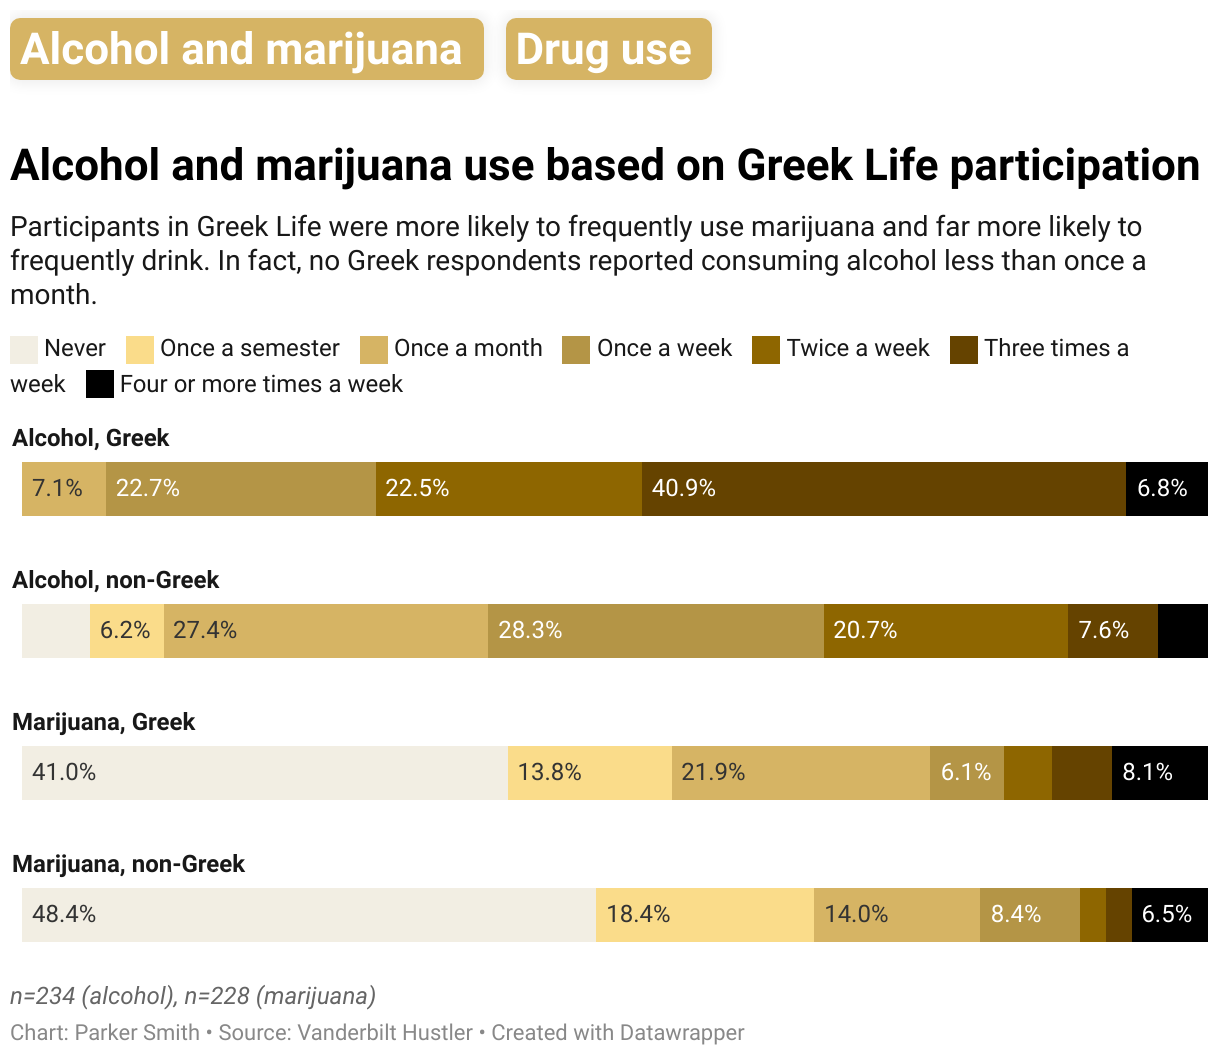 A stacked bar chart indicating more frequent consumption of alcohol and marijuana among students that participate in Greek life. Most notably, the percentage of non-Greek students drinking three times a week is 7.6%, but the number rises to 40.9% for Greek students.